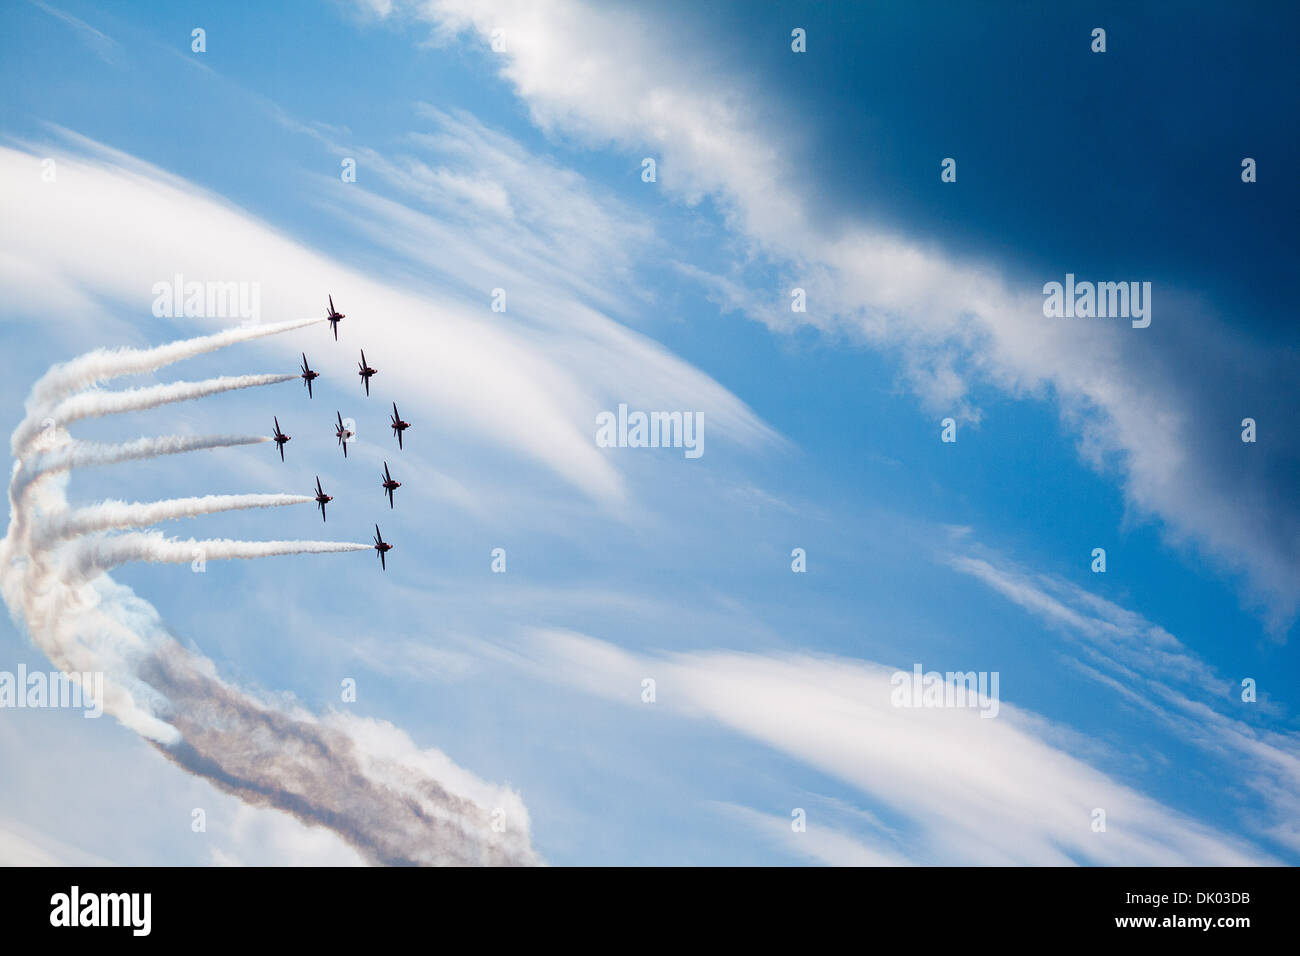 Red Arrows perform a turn with white smoke in their trademark 'Diamond 9' formation, during winter training,Cyprus Stock Photo